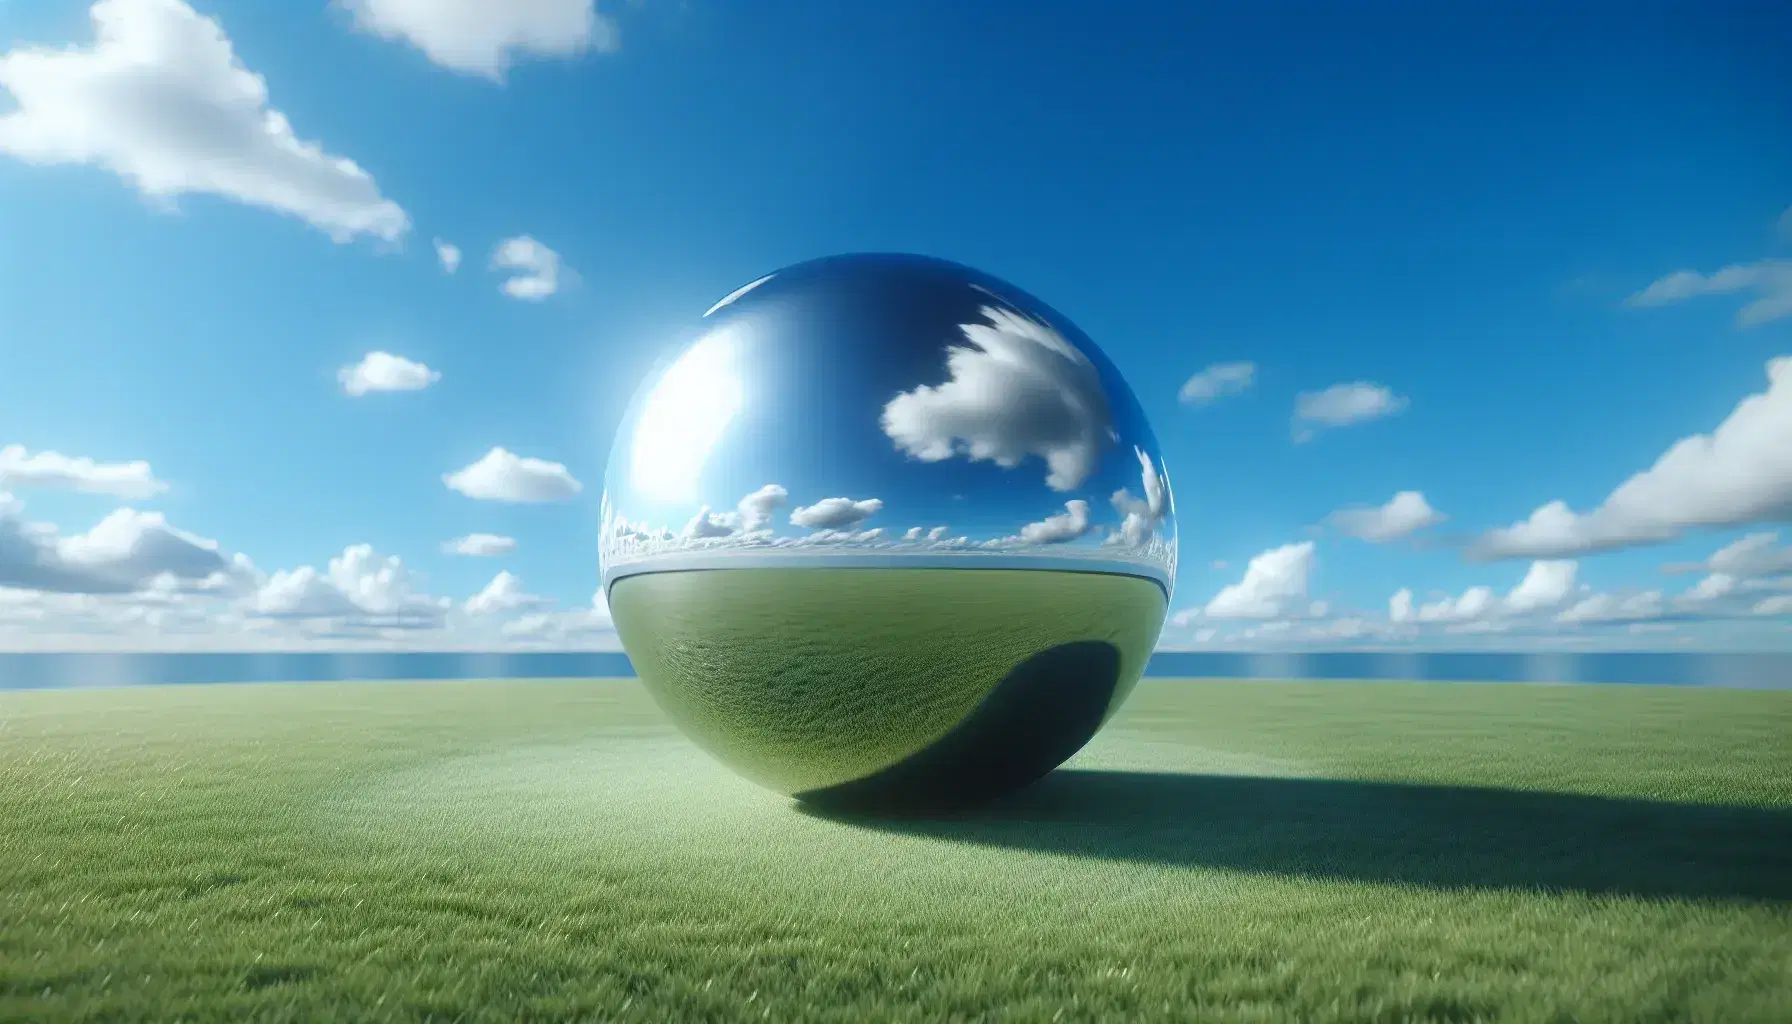 Large reflective silver sphere on green grass under blue sky, mirroring clouds and landscape, with sunlight casting a soft shadow to the right.